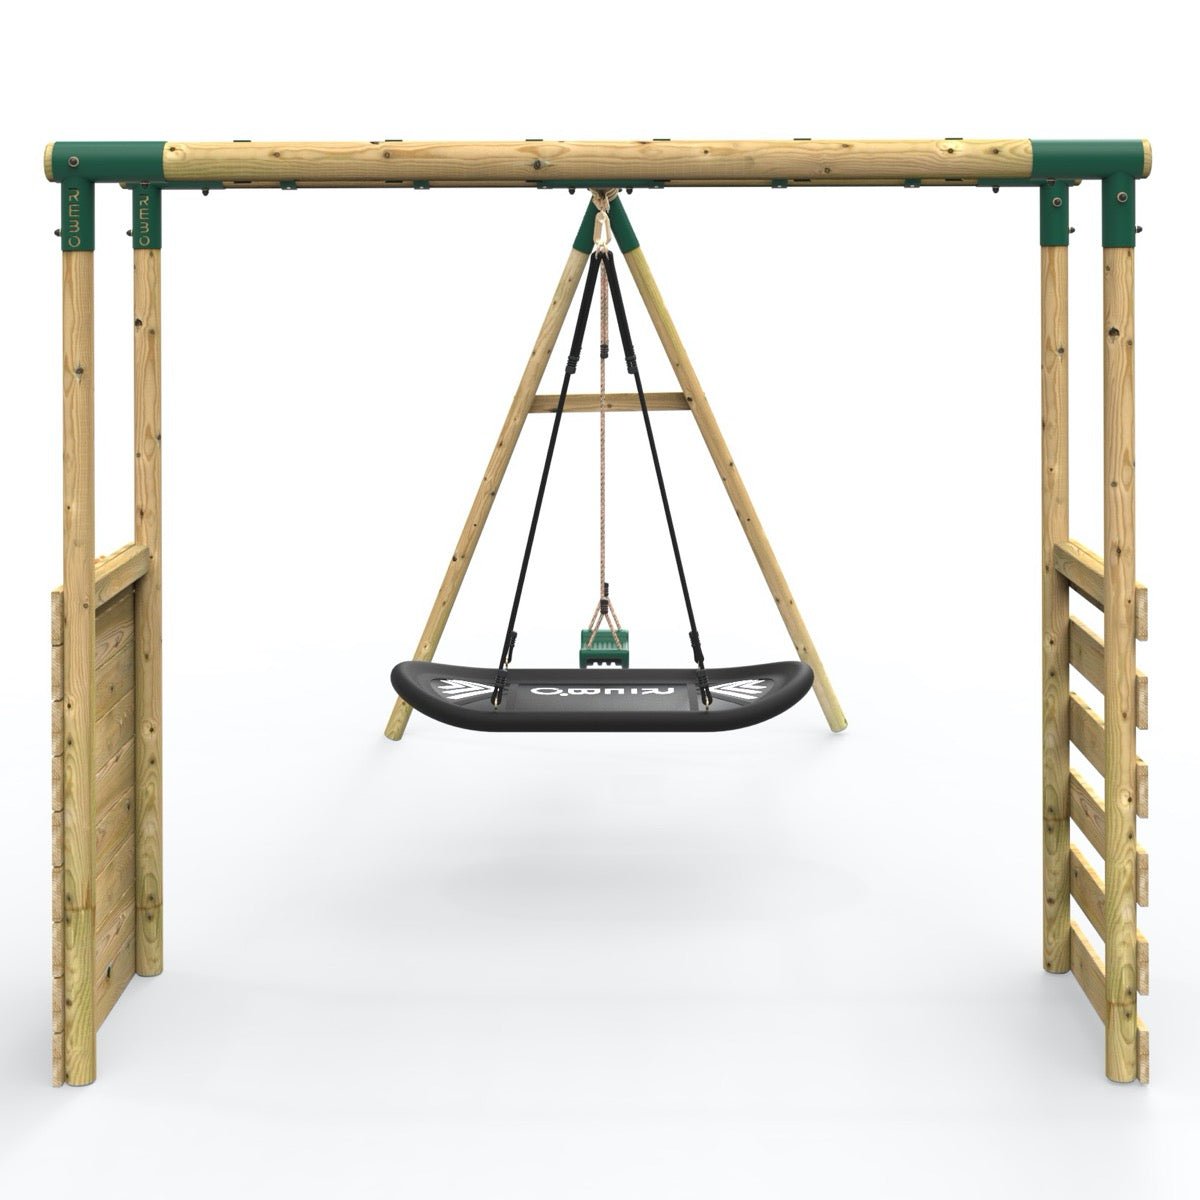 Rebo Wooden Garden Swing Set with Extra-Long Monkey Bars - Sage Green